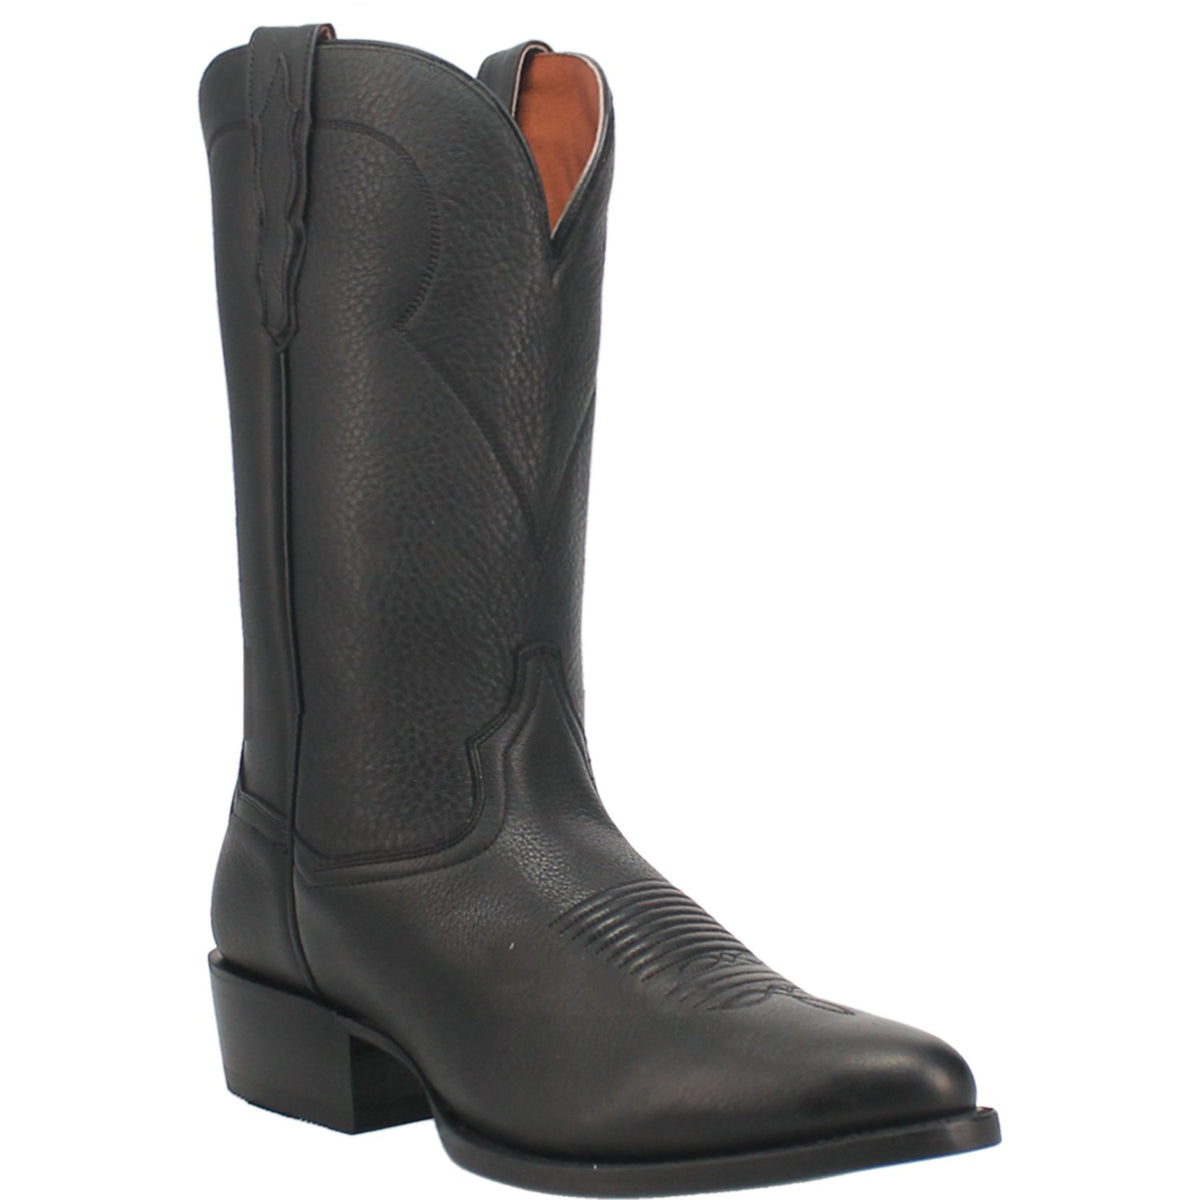 PIKE LEATHER BOOT Cover